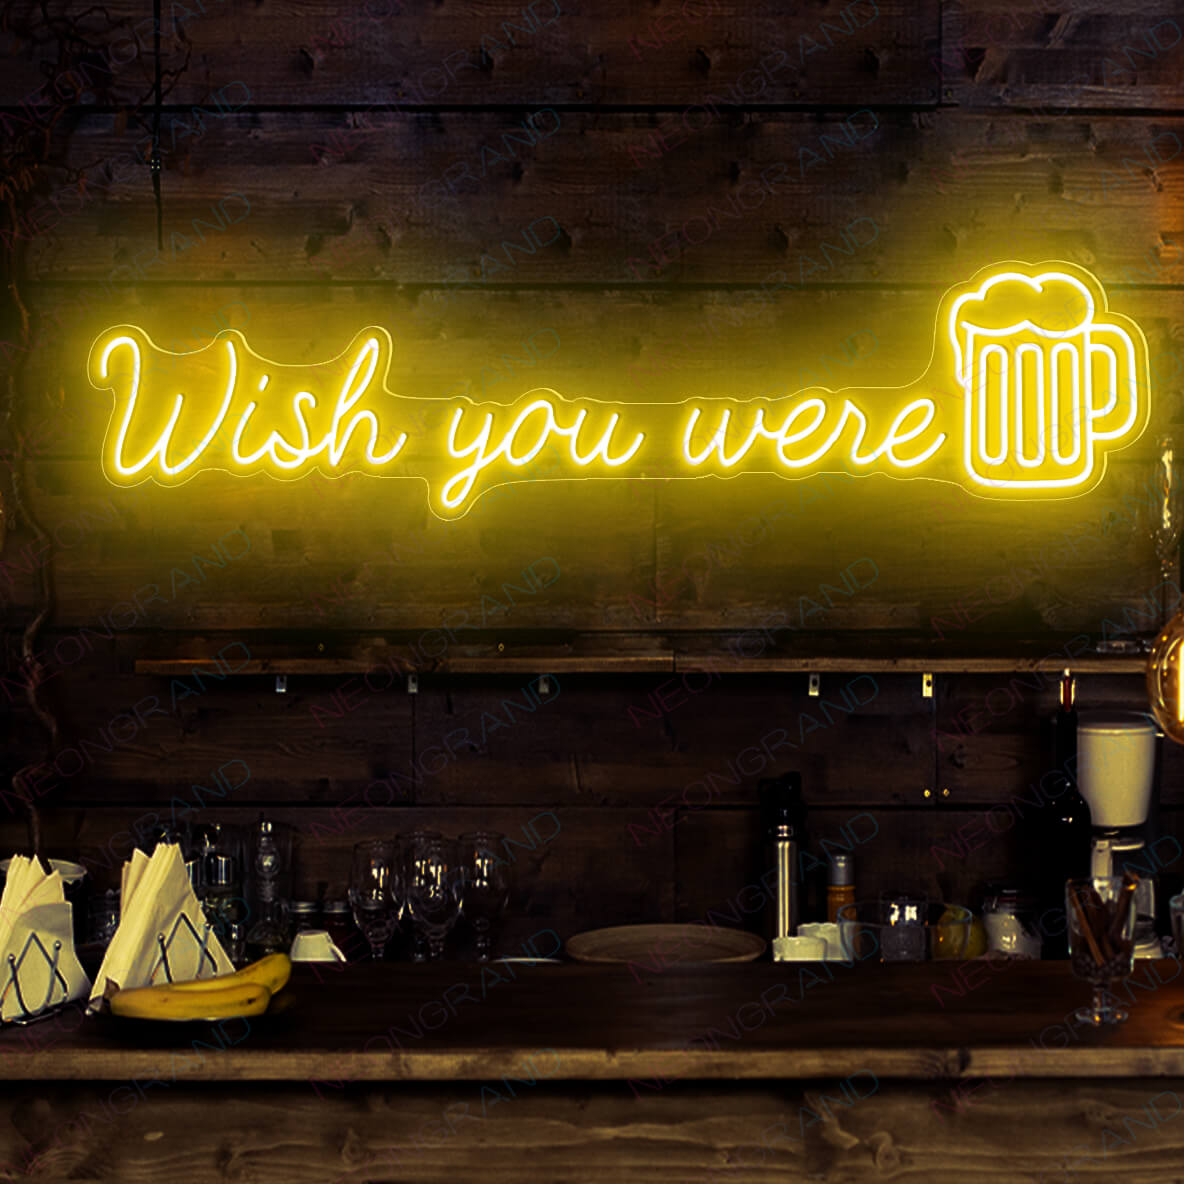 Wish You Were Here Beer Sign Neon Drinking Led Light yellow wm